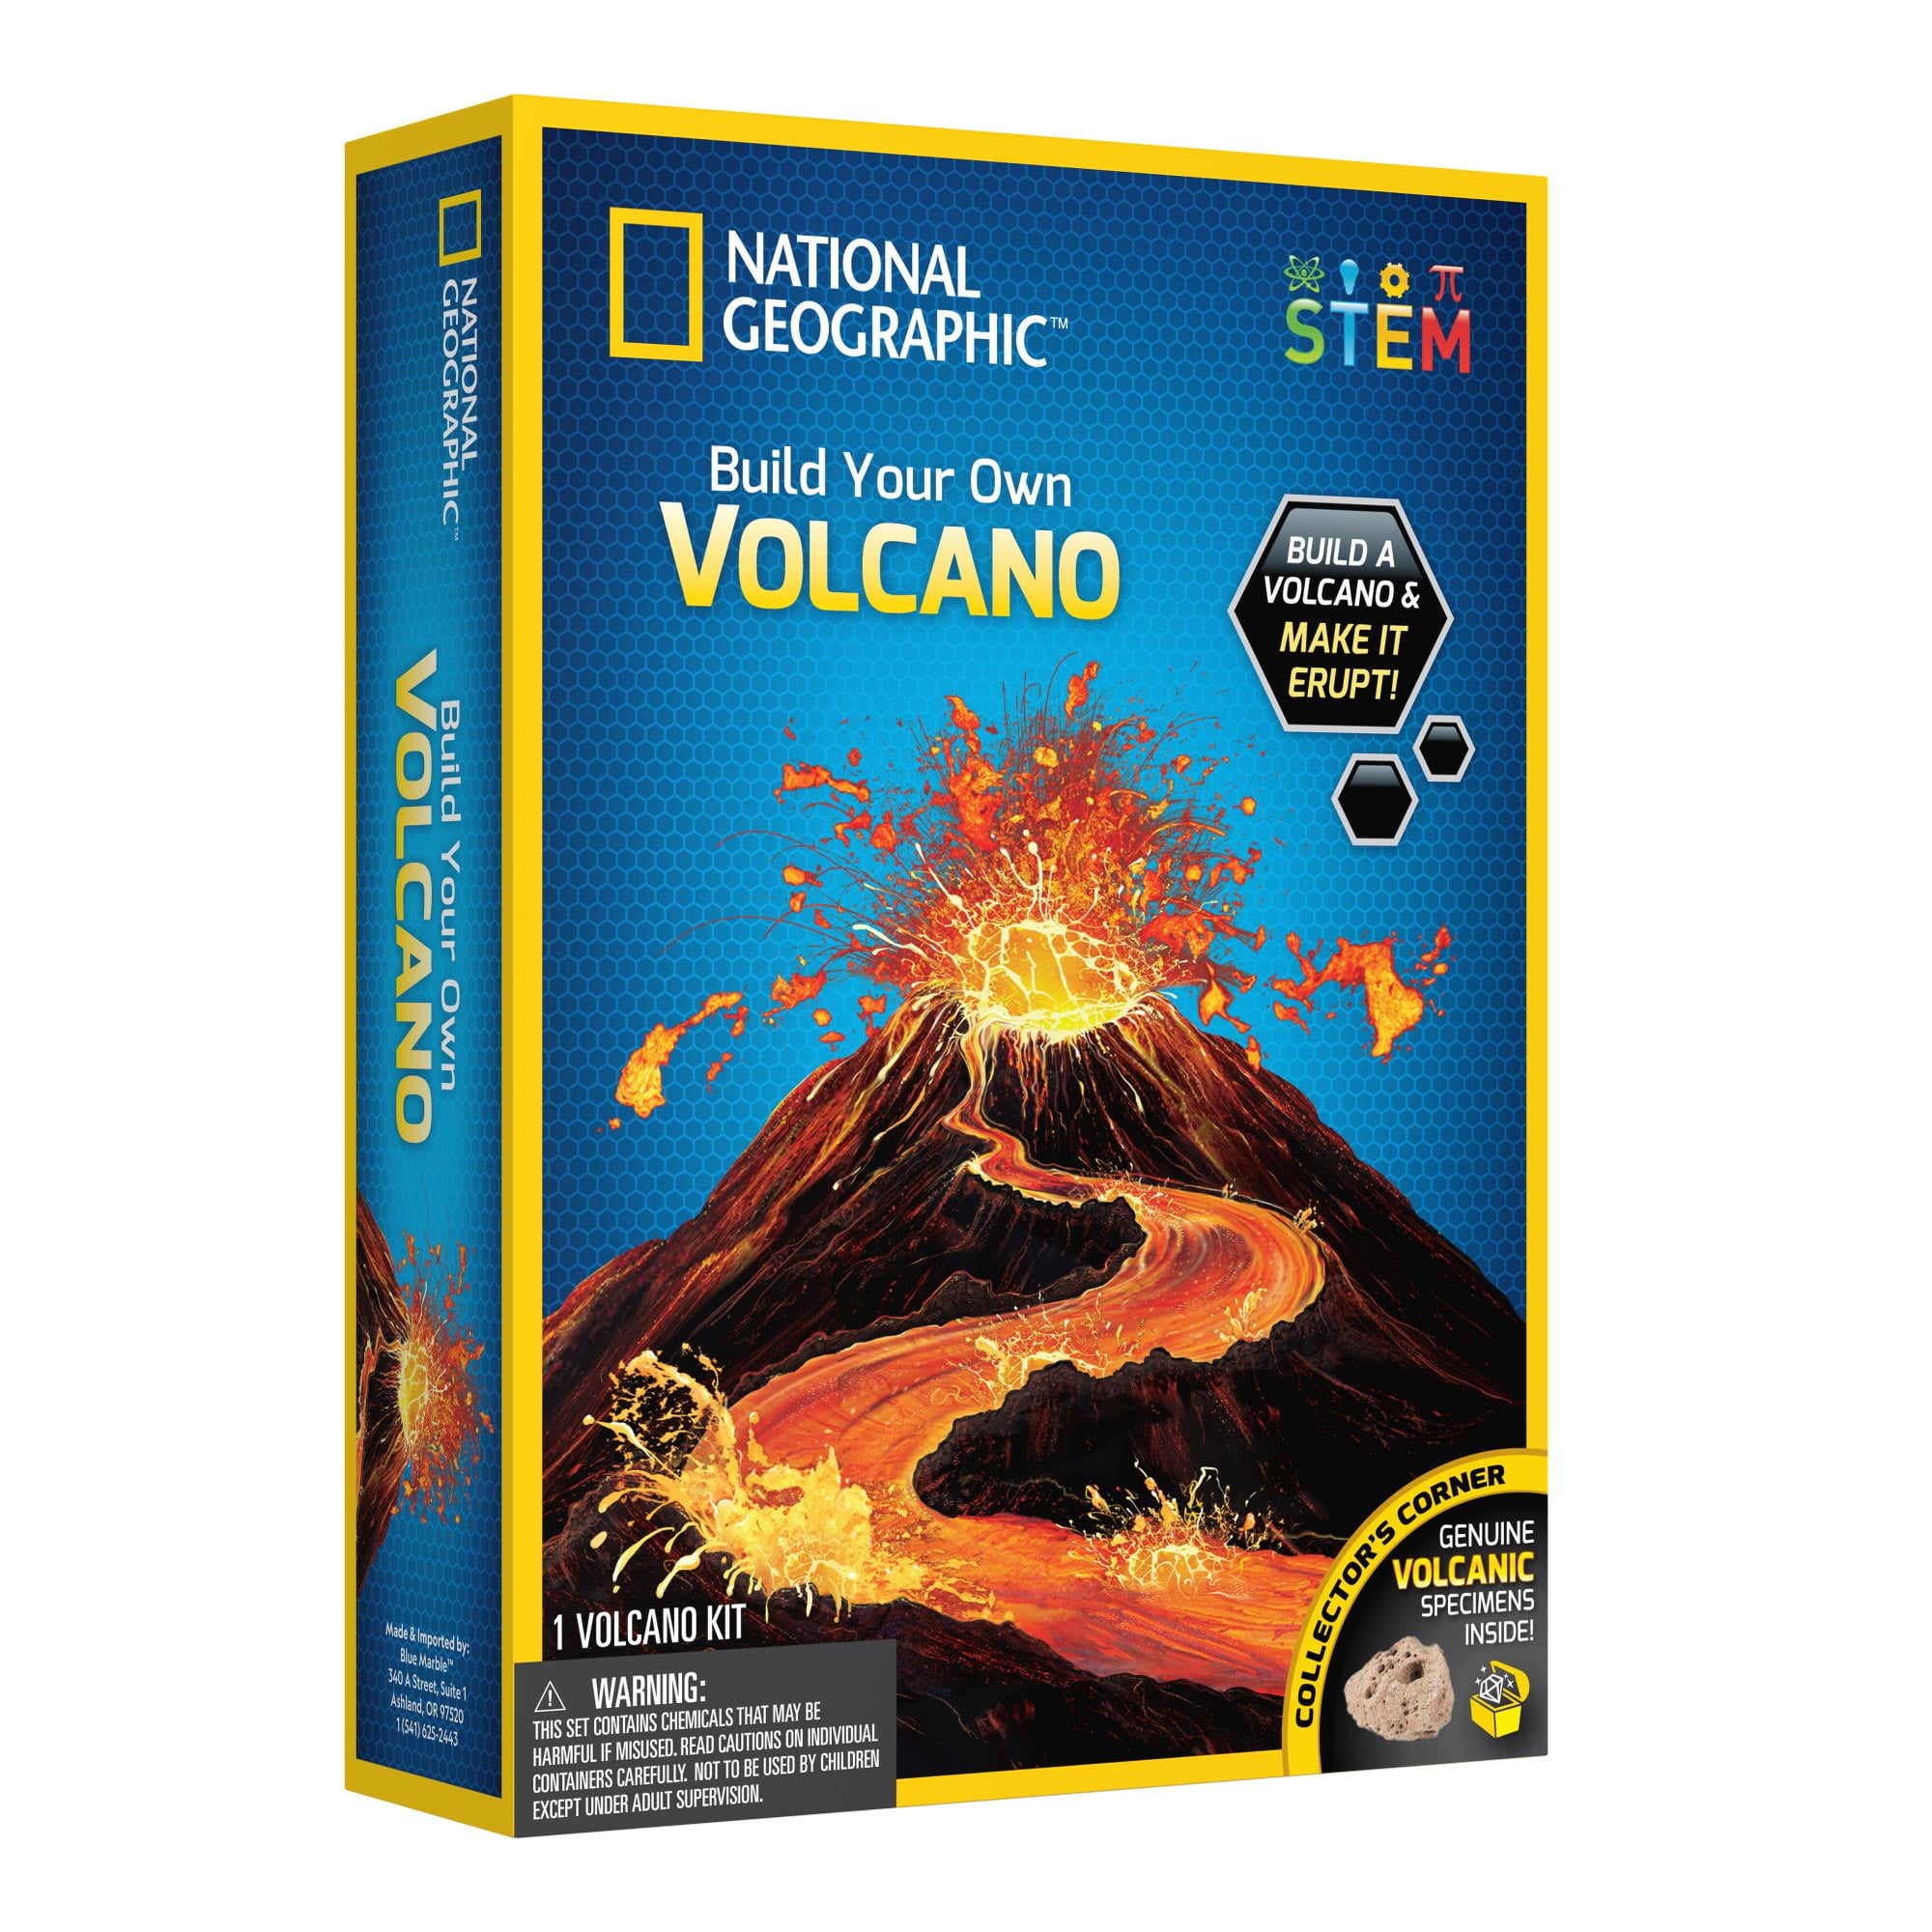 NEW DIY CREATE YOUR OWN VOLCANO ERUPTION KIT FOR KIDS WORLD OF SCIENCE 